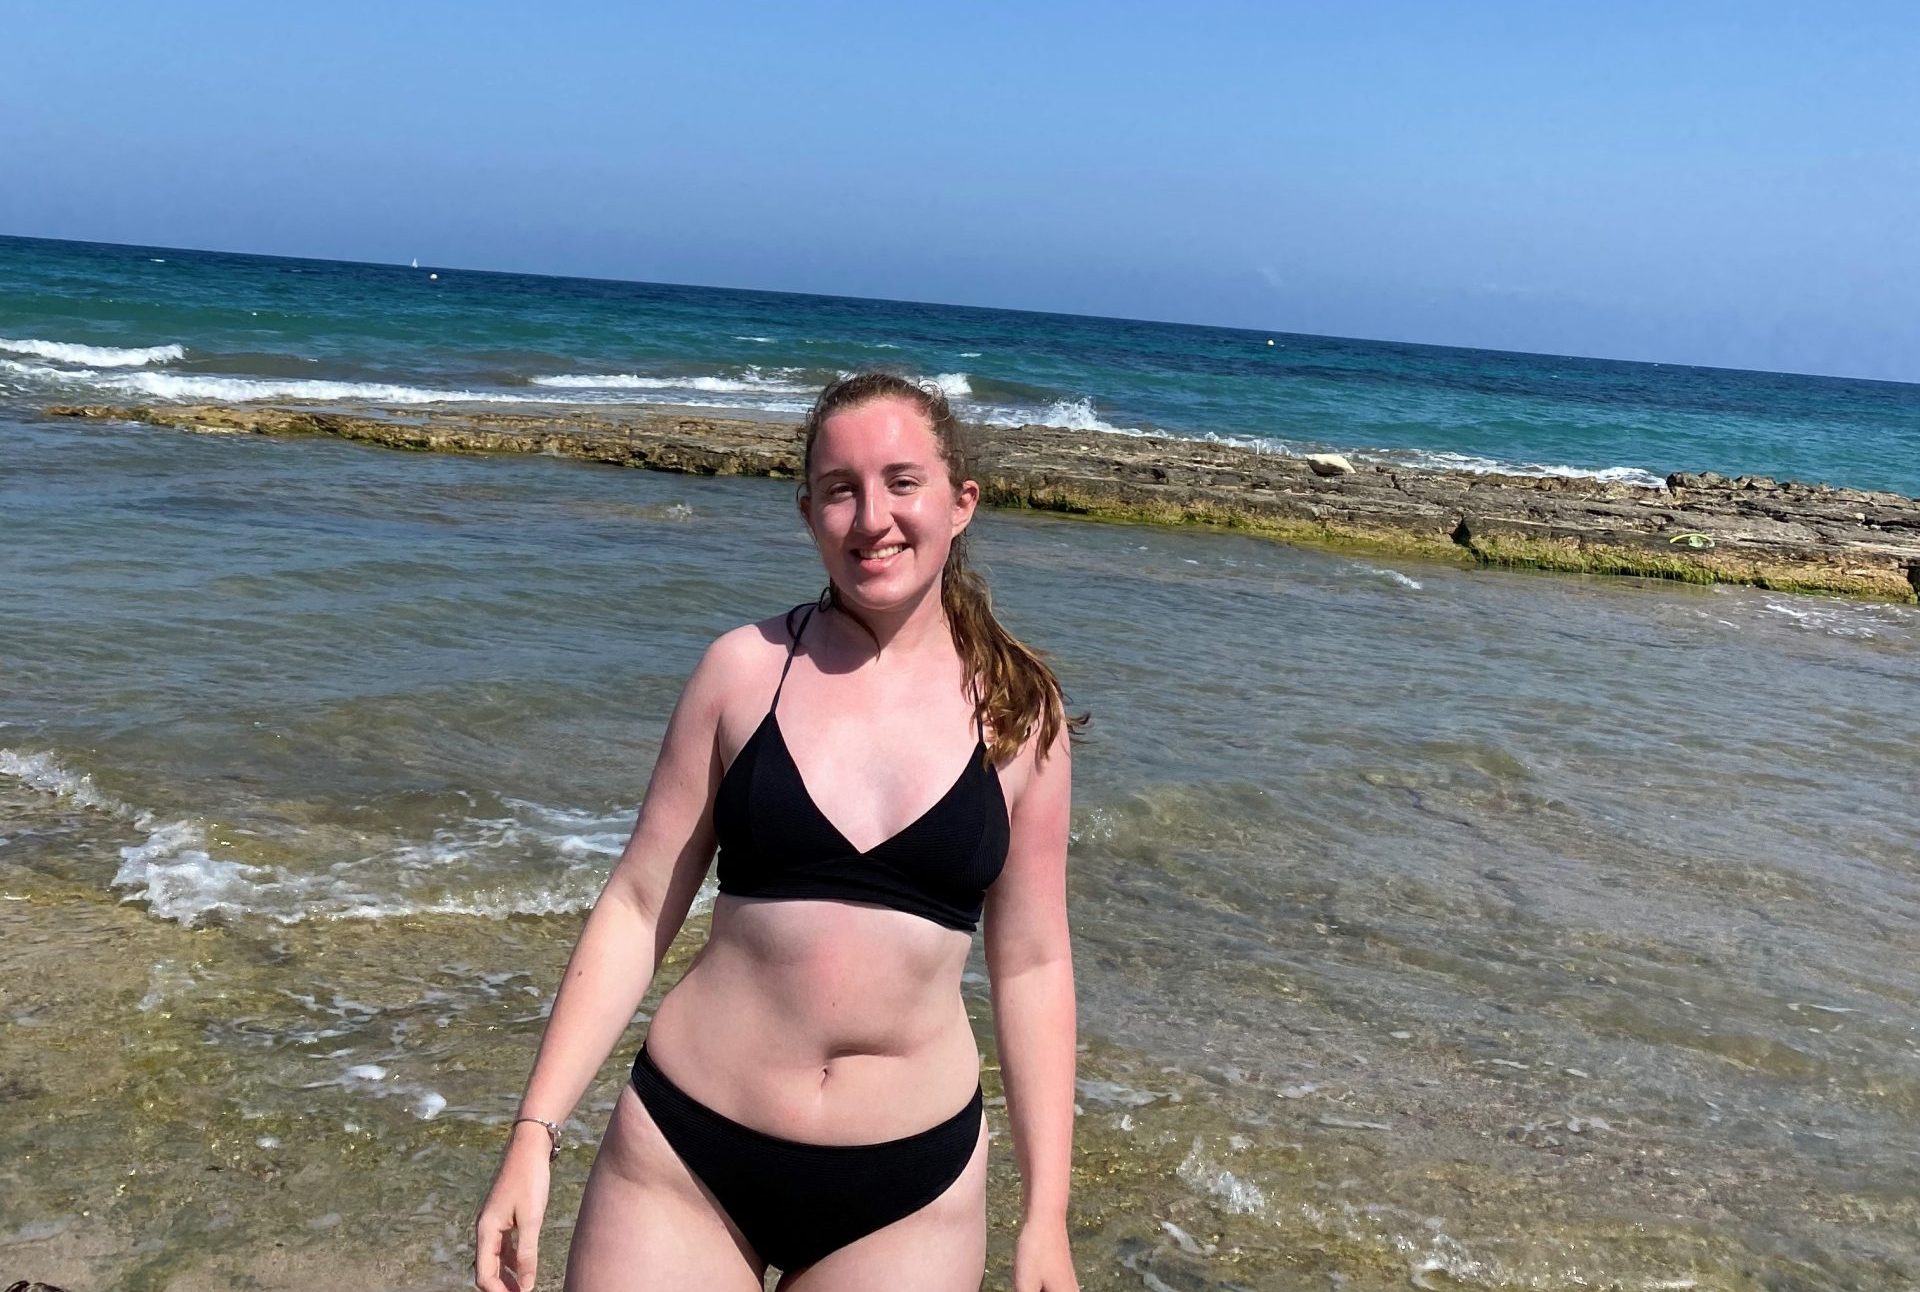 Allie in her black bikini, smiling in front of a beautiful beach. Her abdominal scar is visible